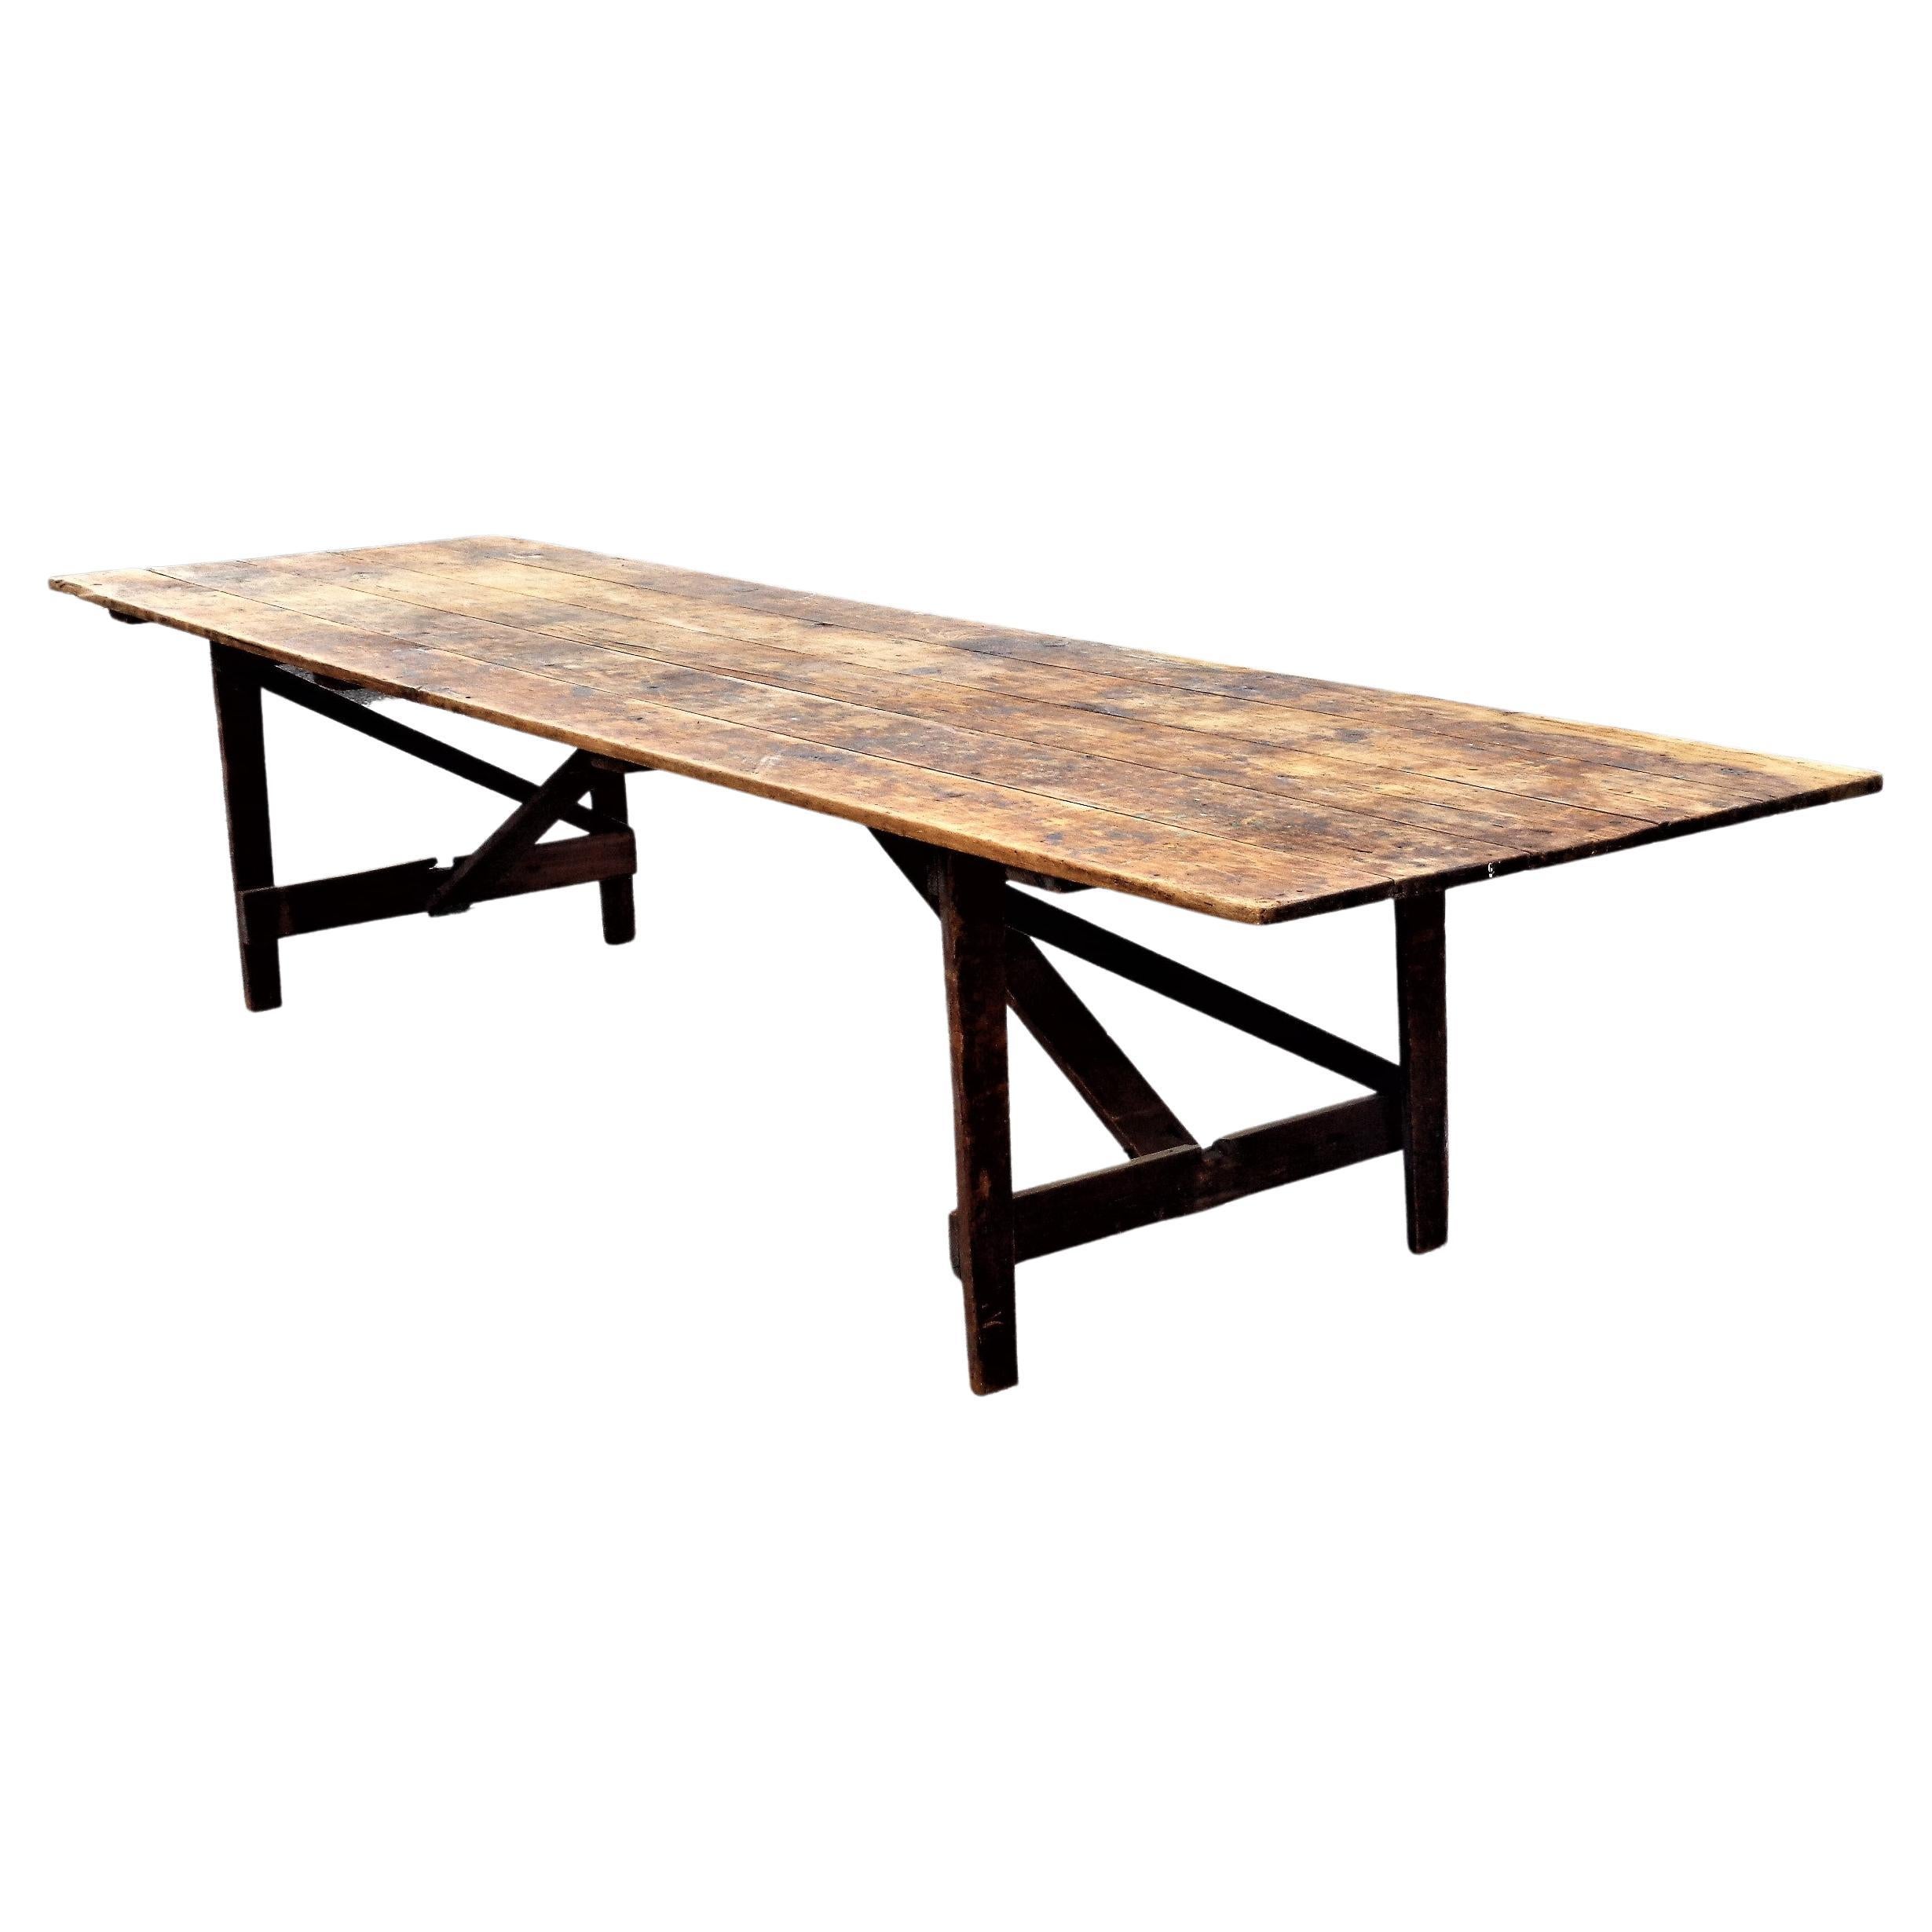 Wood Antique American Eleven Foot Long Folding Farm Table For Sale